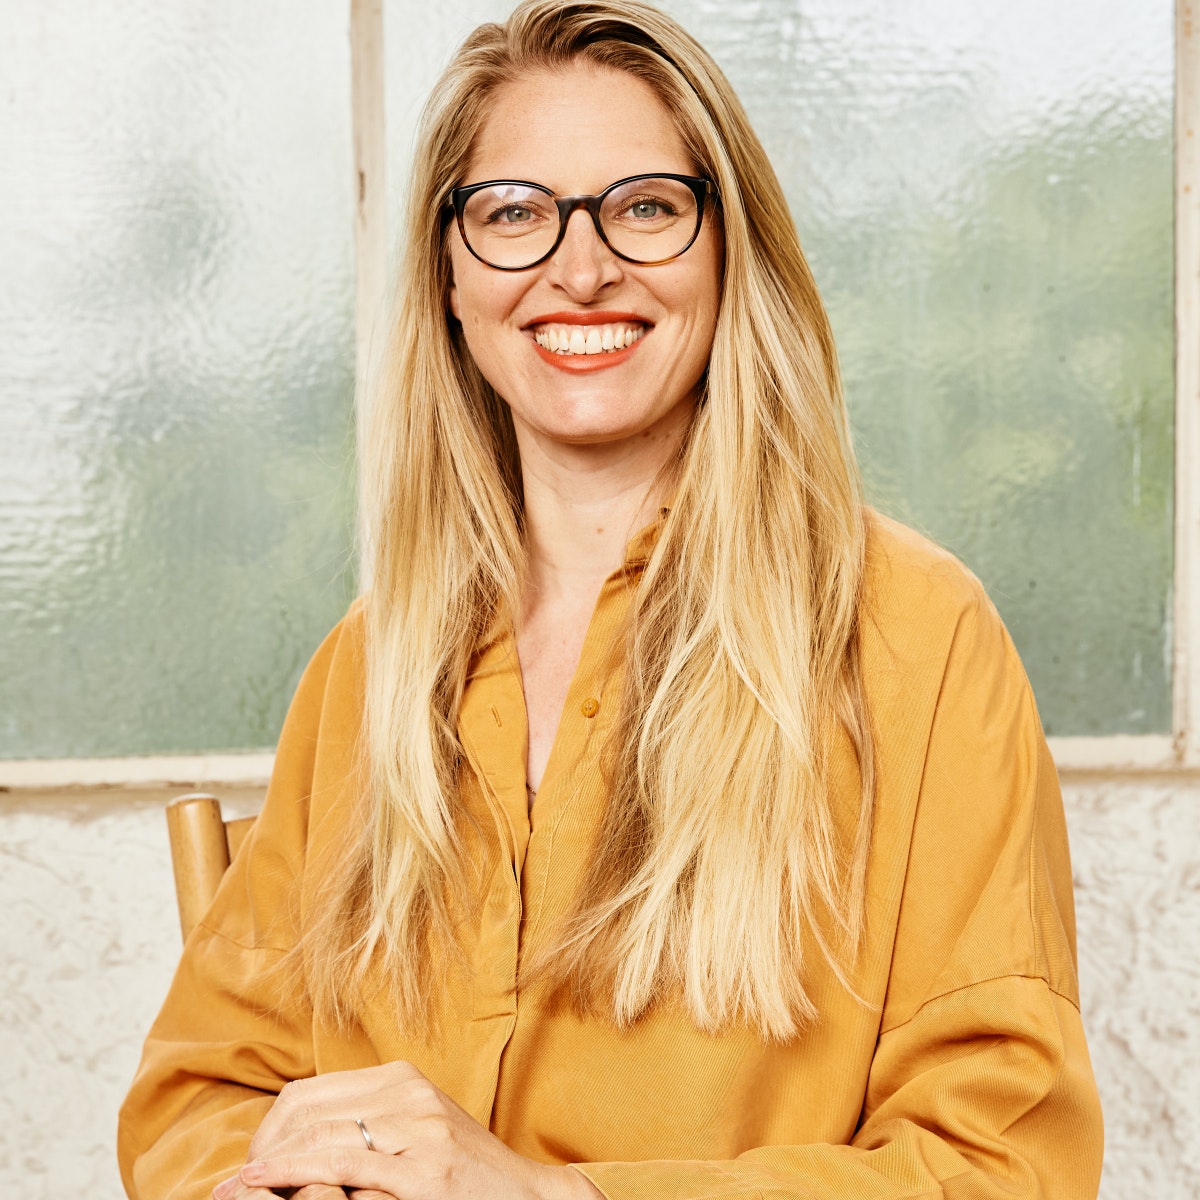 For Ooia founder Kati Ernst, bootstrapping was the right way up to now (Photo: Ooia)